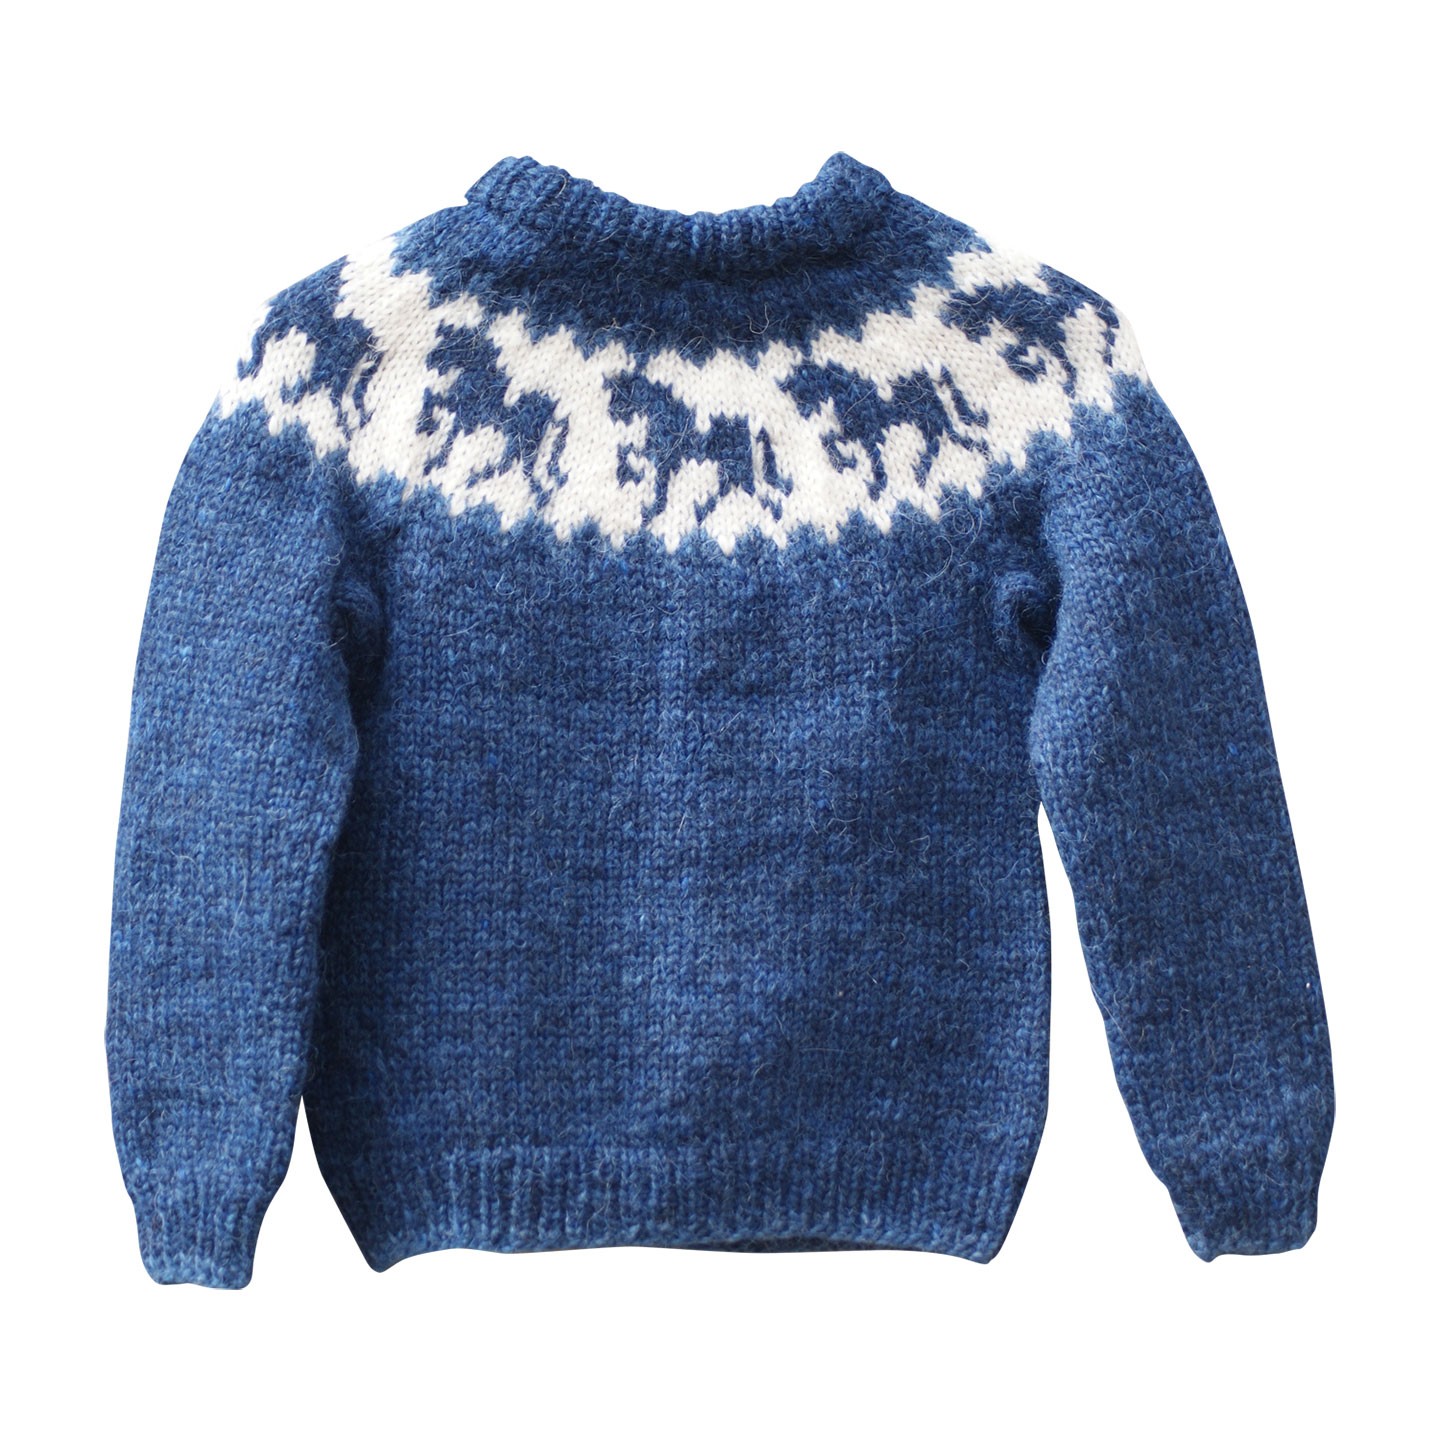 Quality wool sweater from Team Magnus for kids and adults